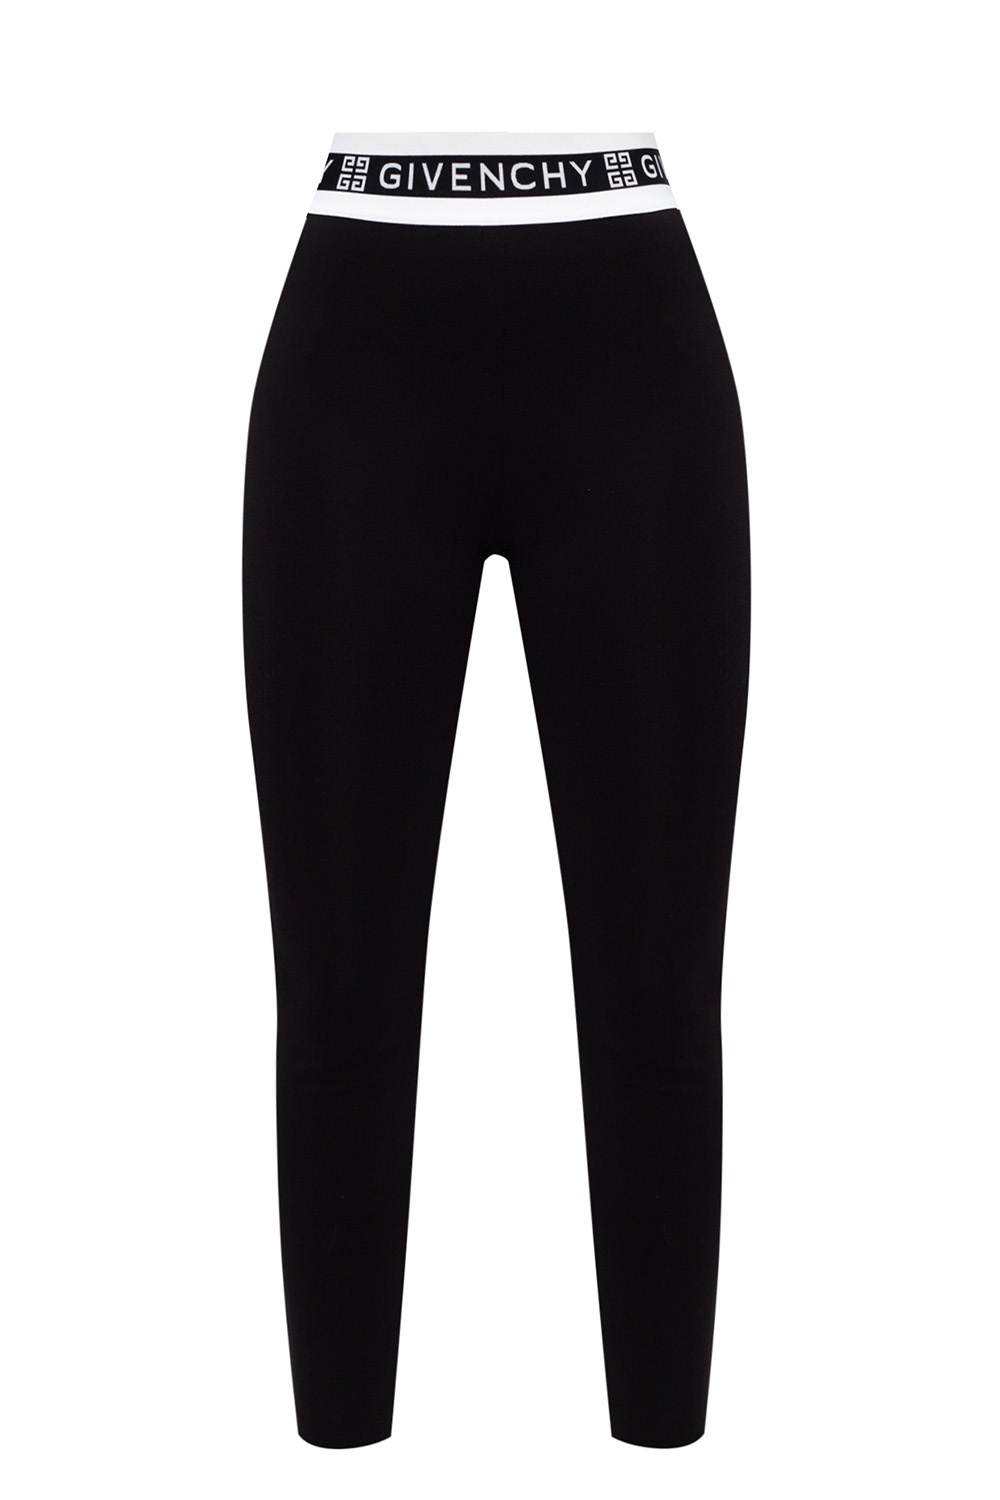 givenchy trousers womens